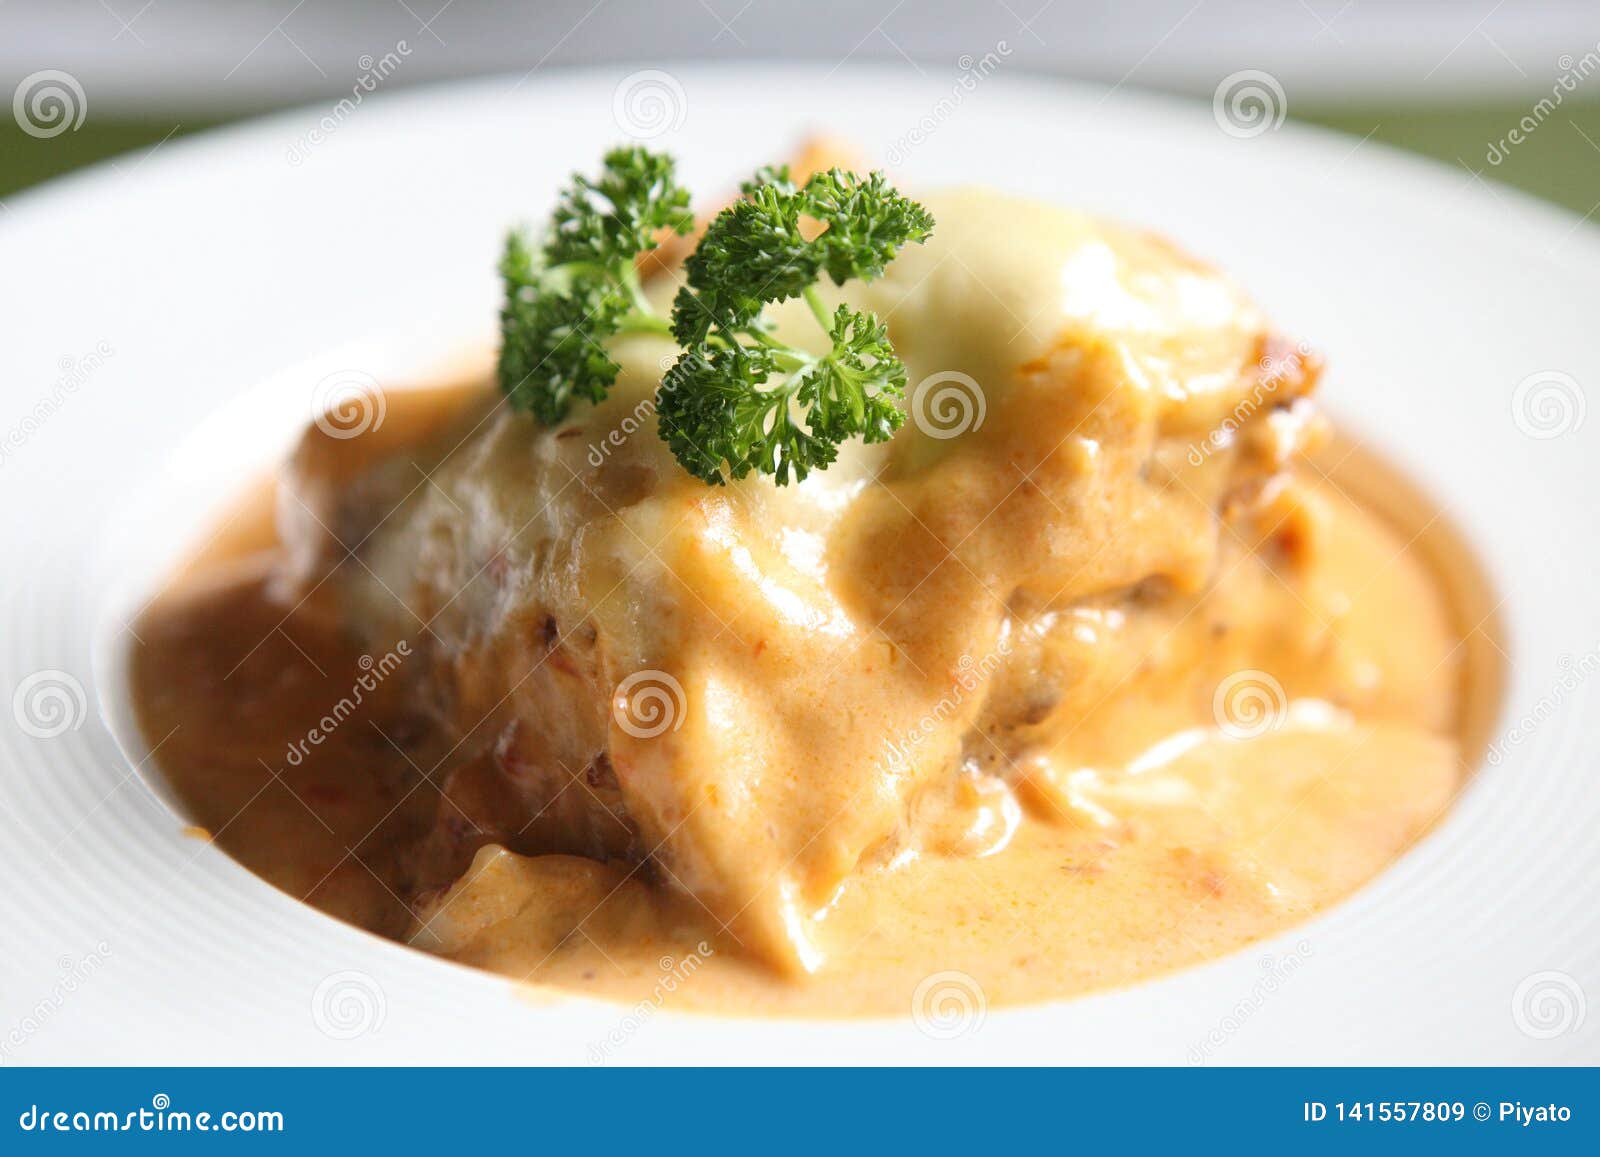 Meat and Cheese Lasagna stock image. Image of delicious - 141557809